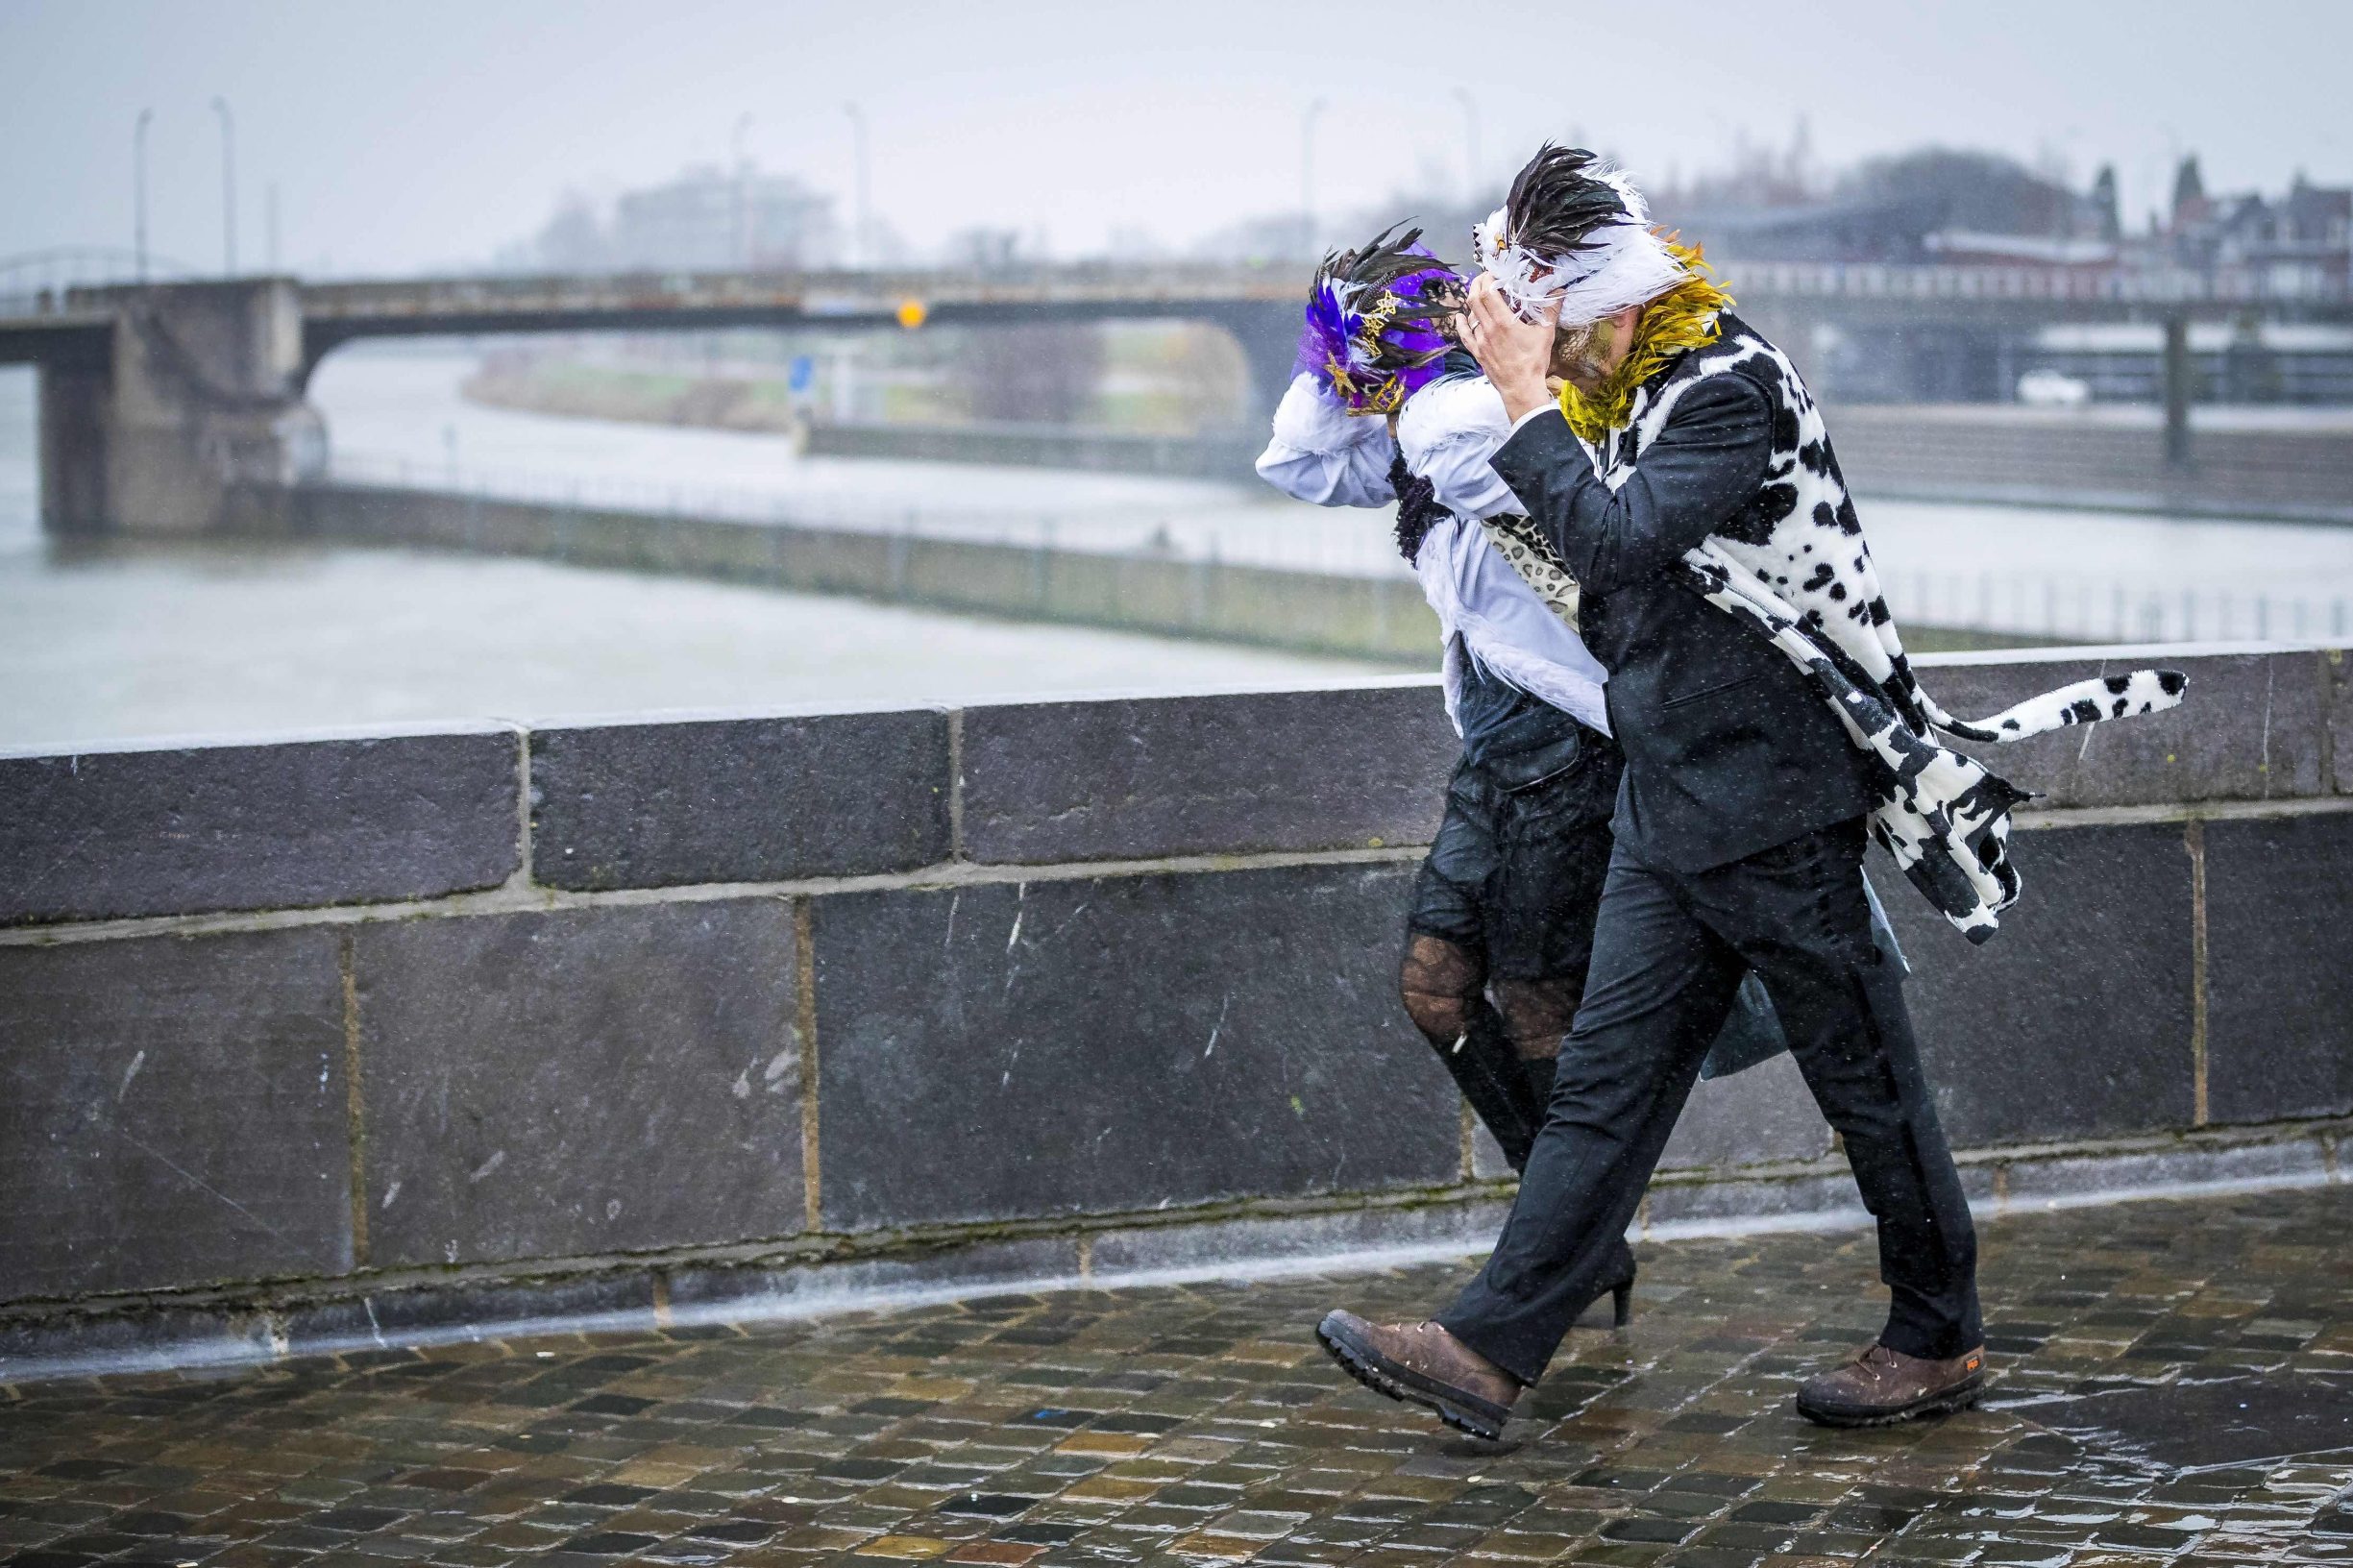 Revellers hold on to their costumes during strong winds in Maastricht, The Netherlands, on February 23, 2020. (Photo by Marcel VAN HOORN / ANP / AFP) / Netherlands OUT